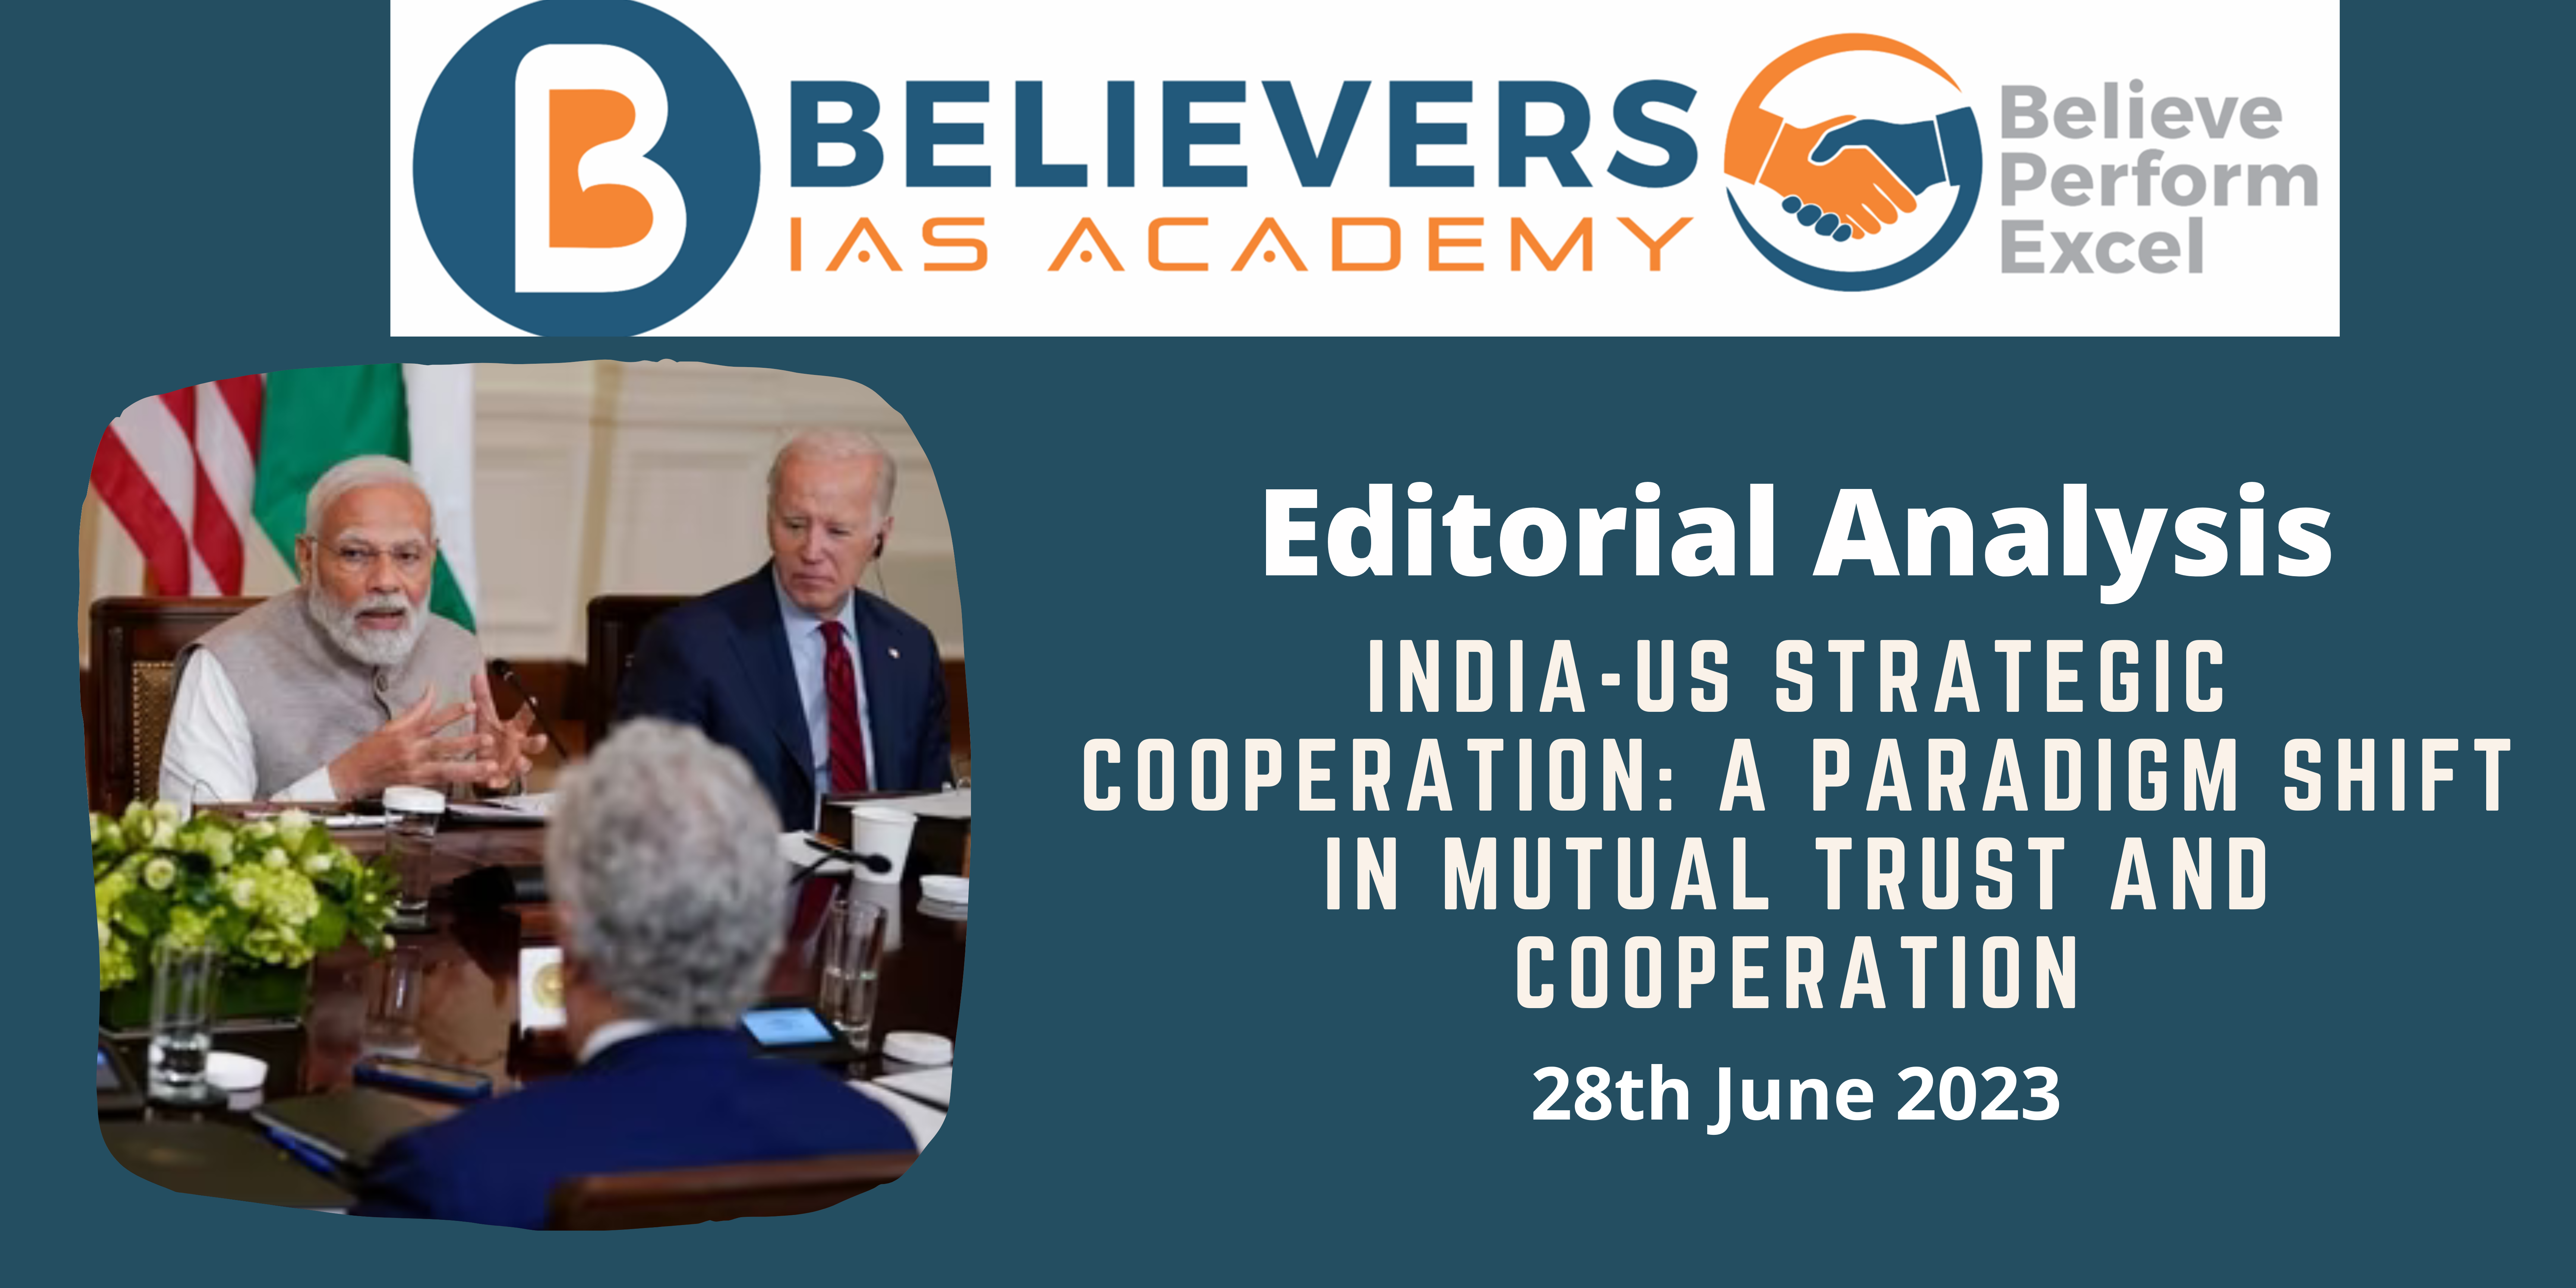 India-US Strategic Cooperation: A Paradigm Shift in Mutual Trust and Cooperation